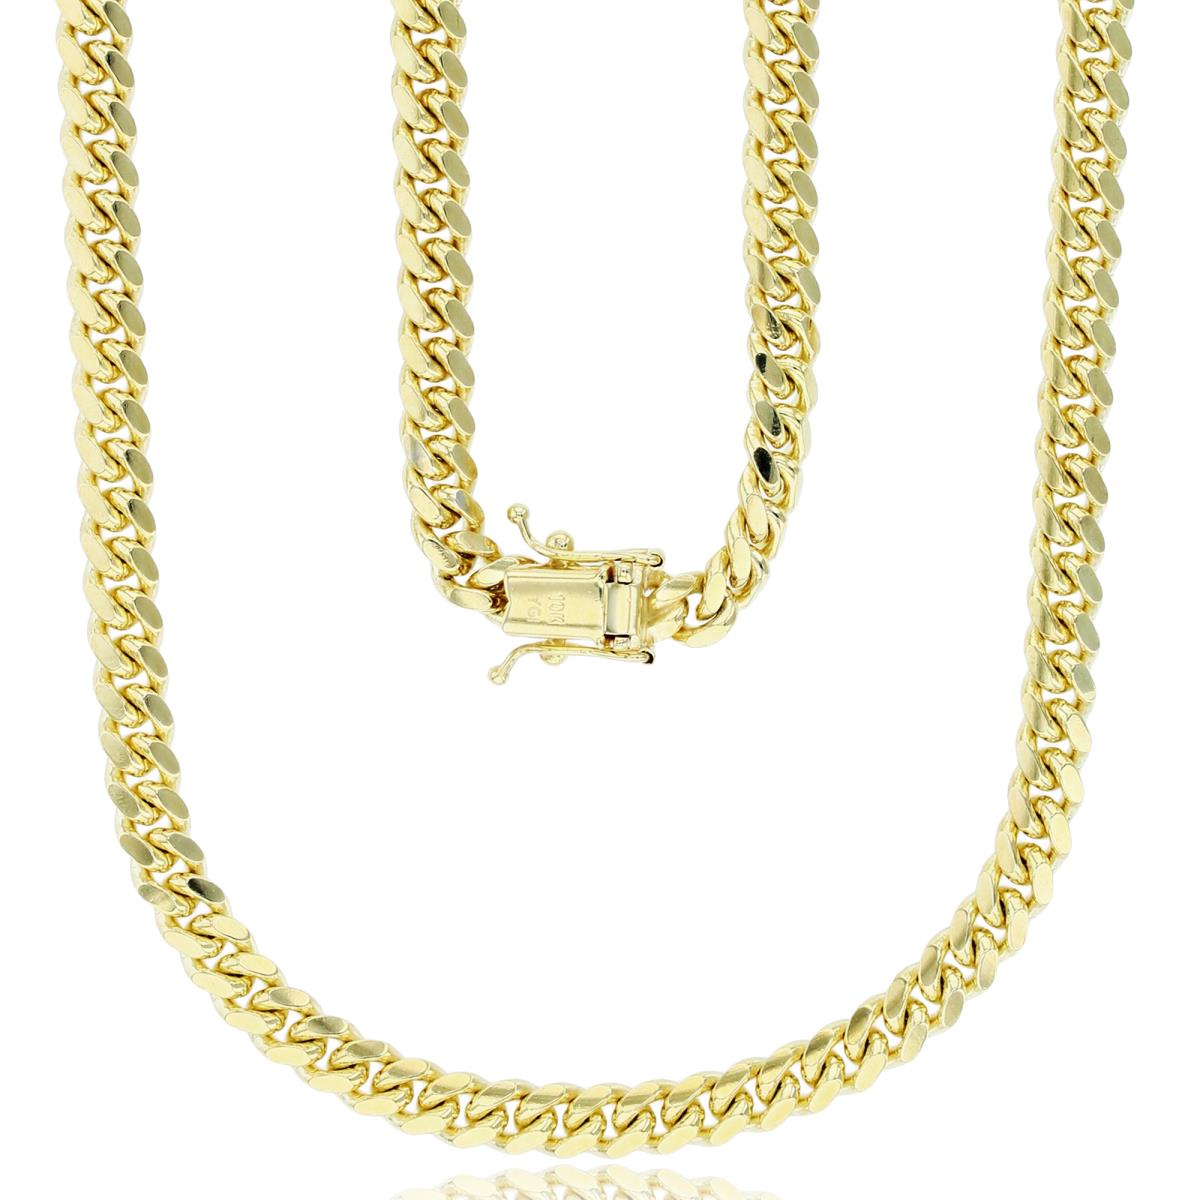 10K Yellow Gold 5mm 24" 150 Solid Miami Cuban Chain with Box Lock